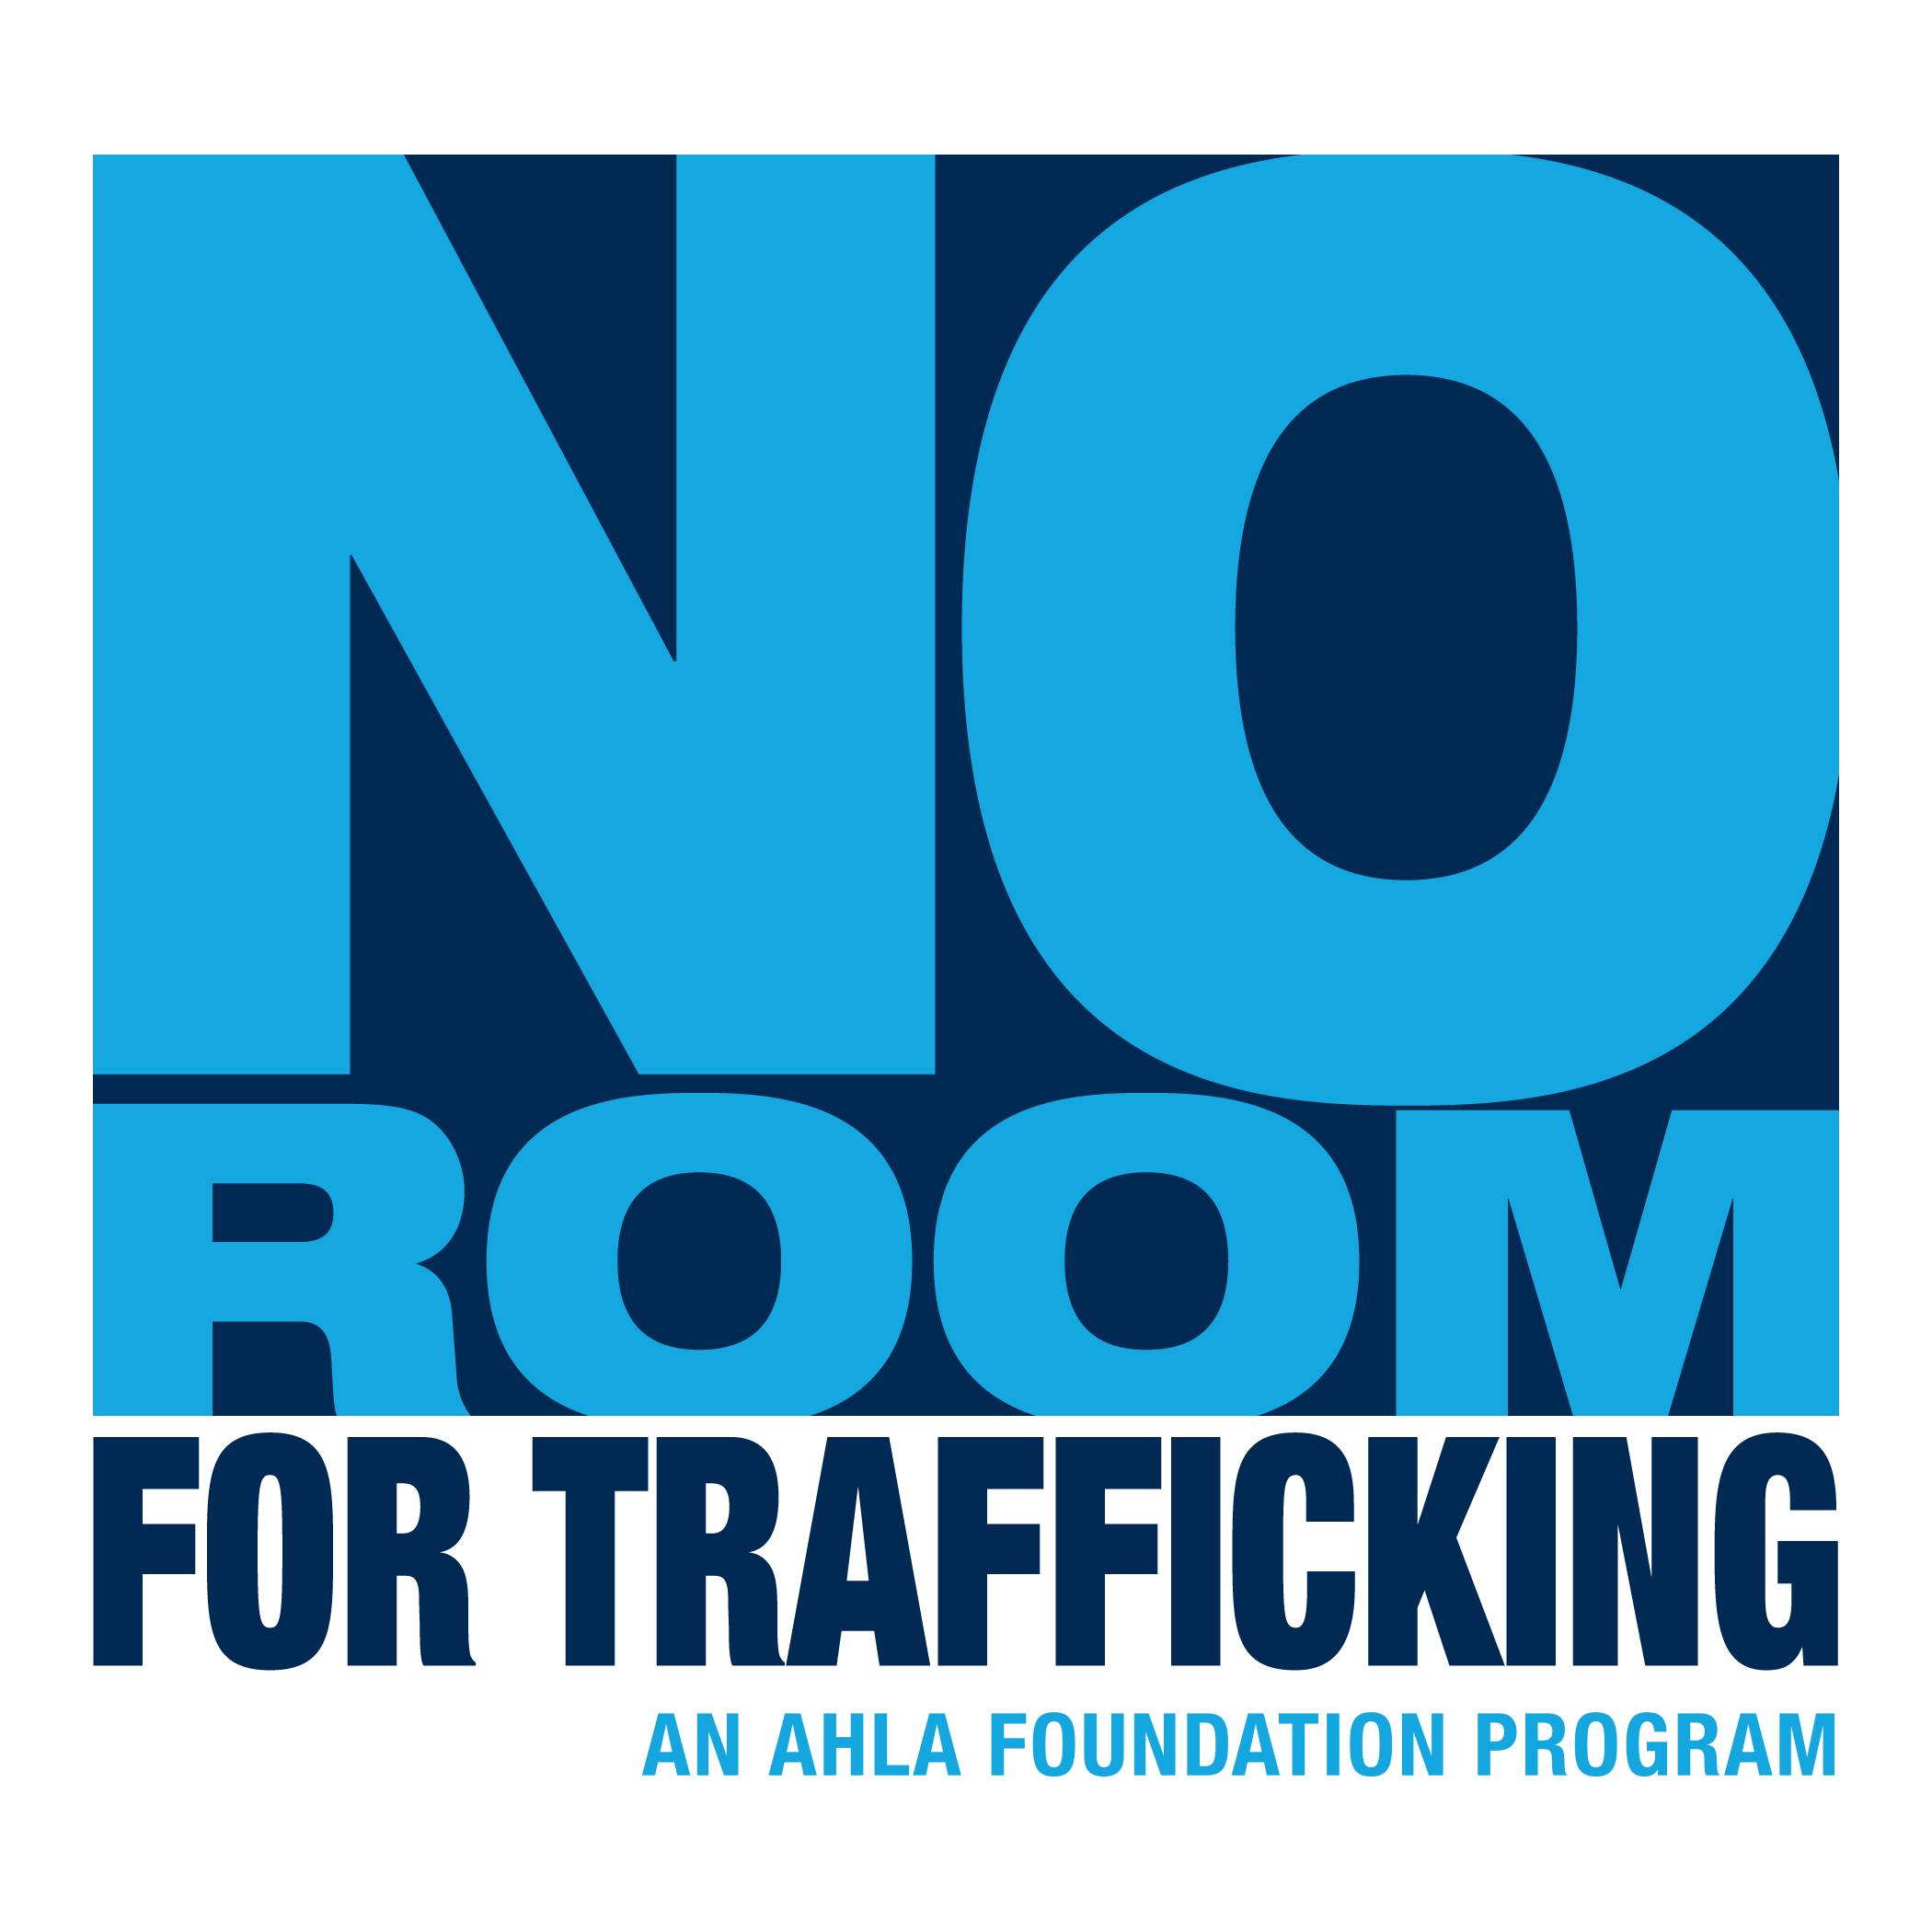 No Room for Trafficking